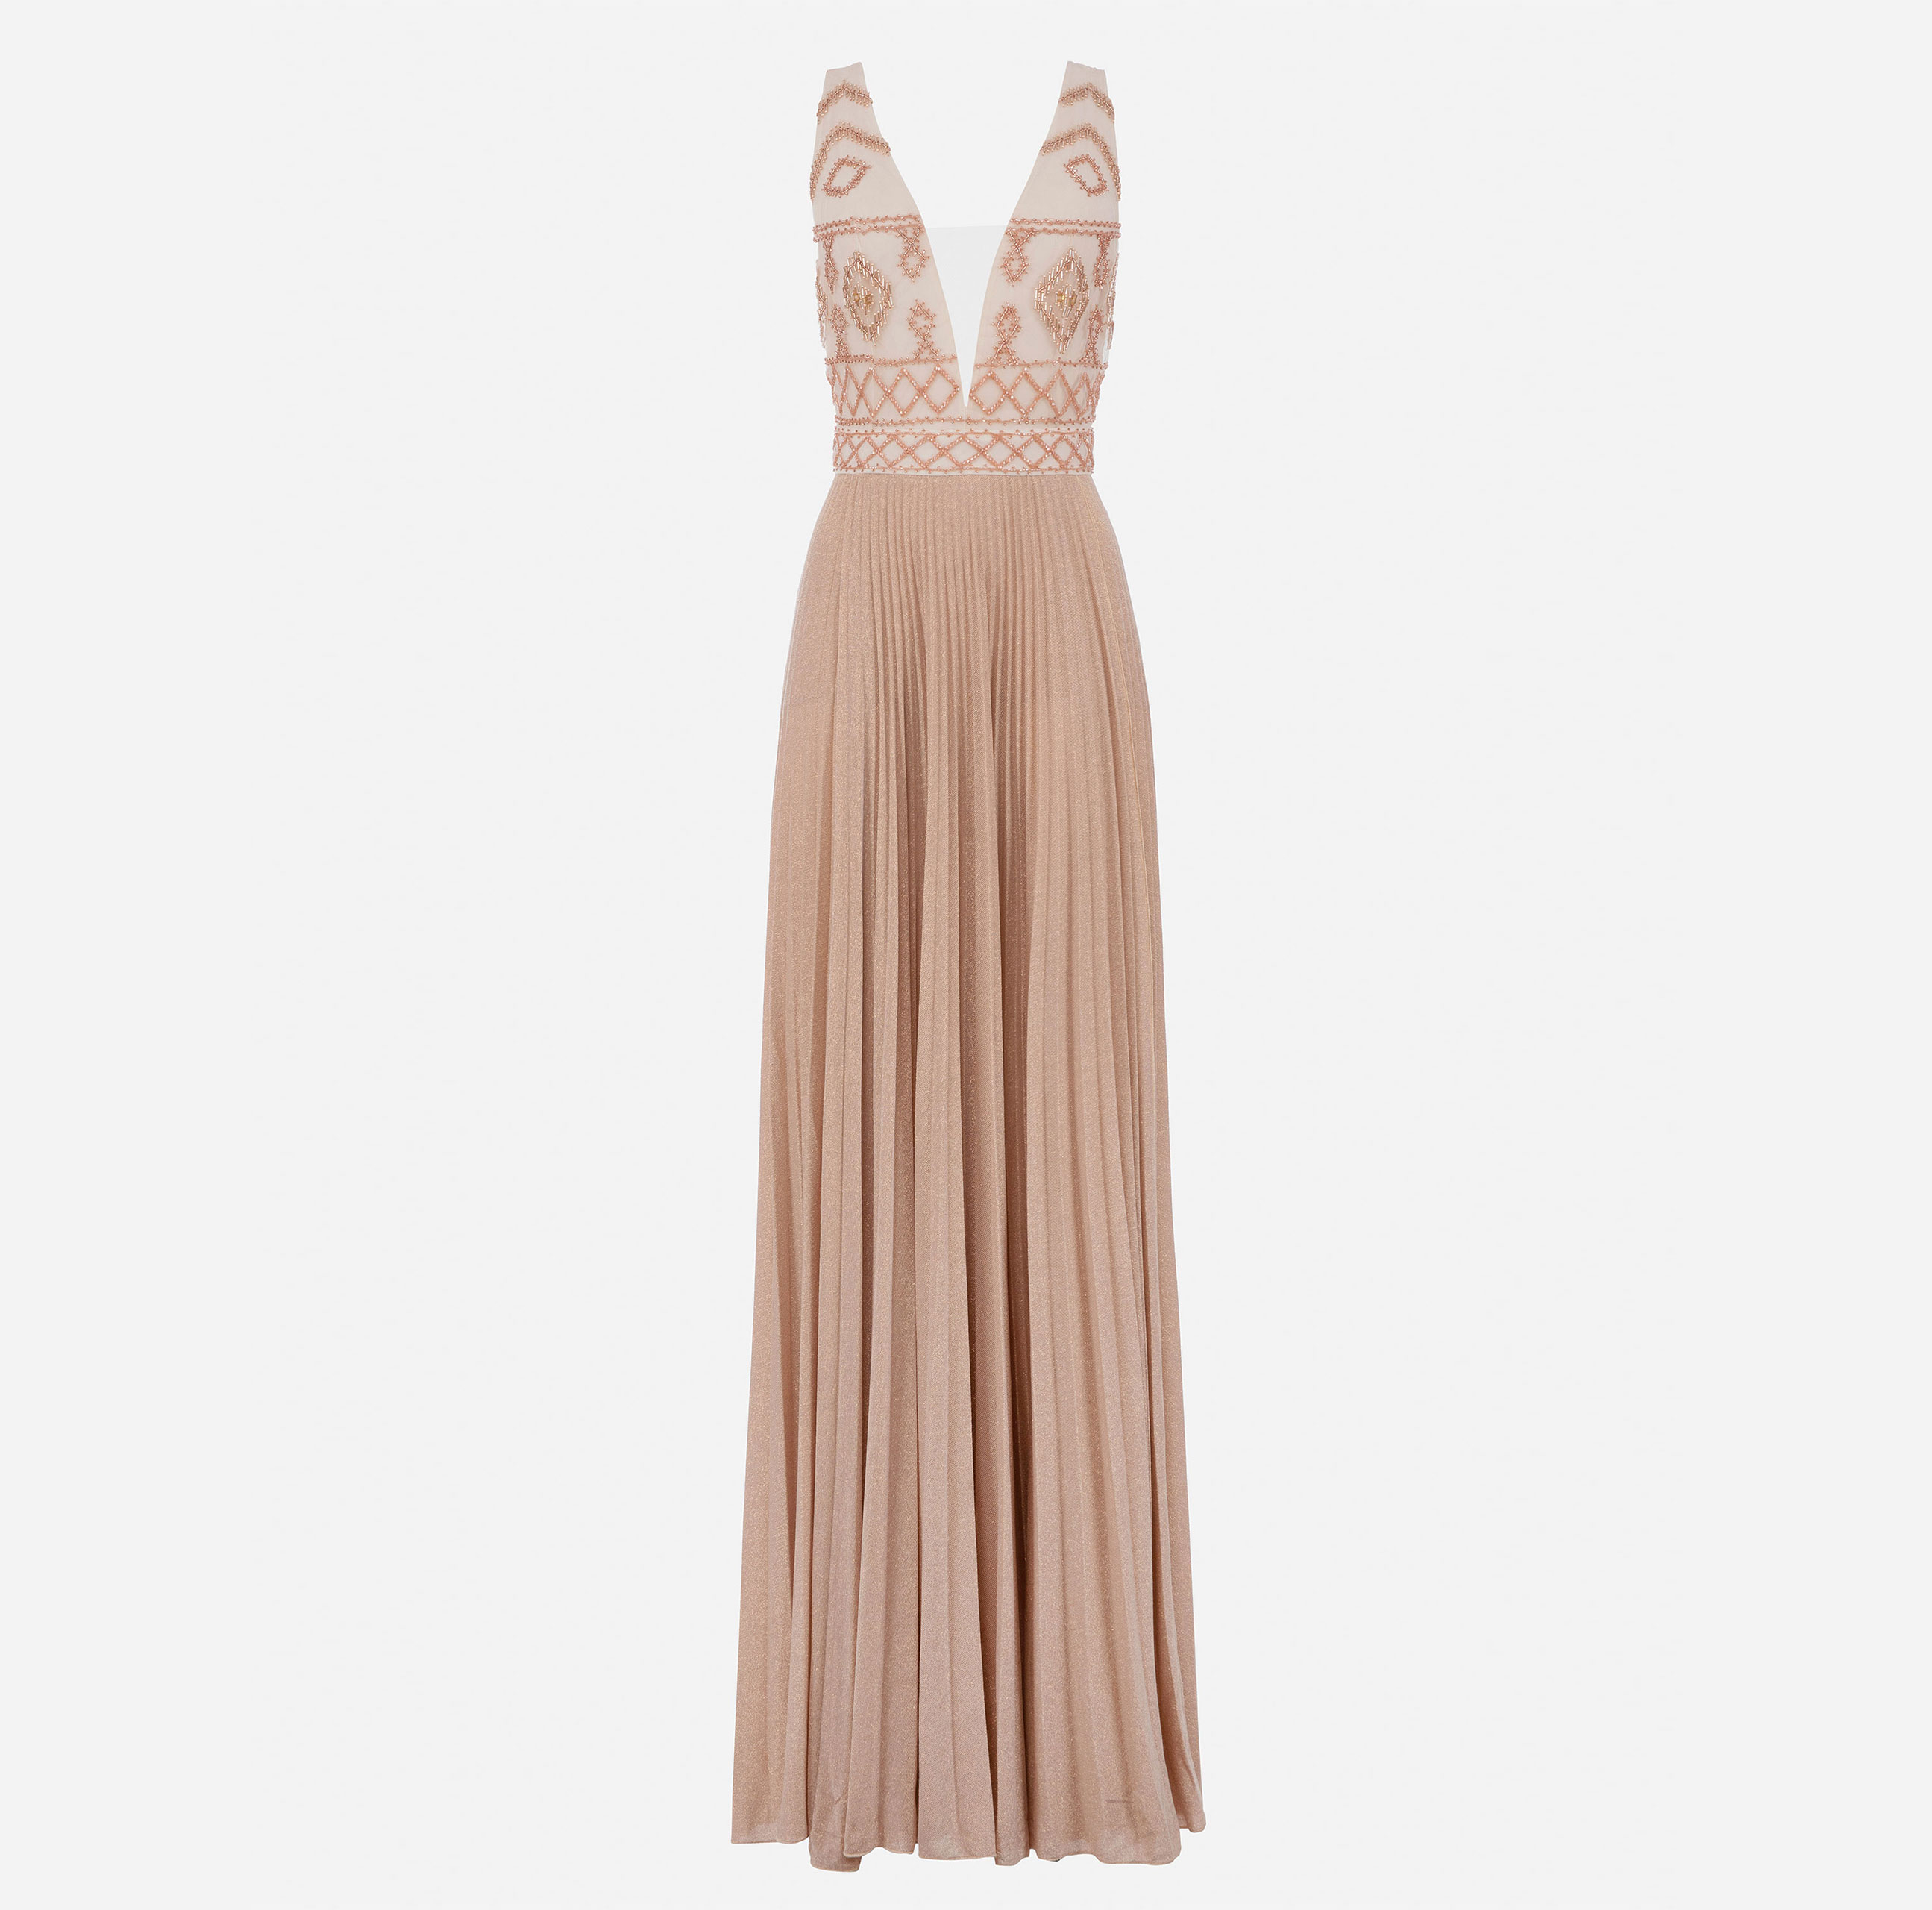 Red carpet dress with rhombus embroidery - Elisabetta Franchi